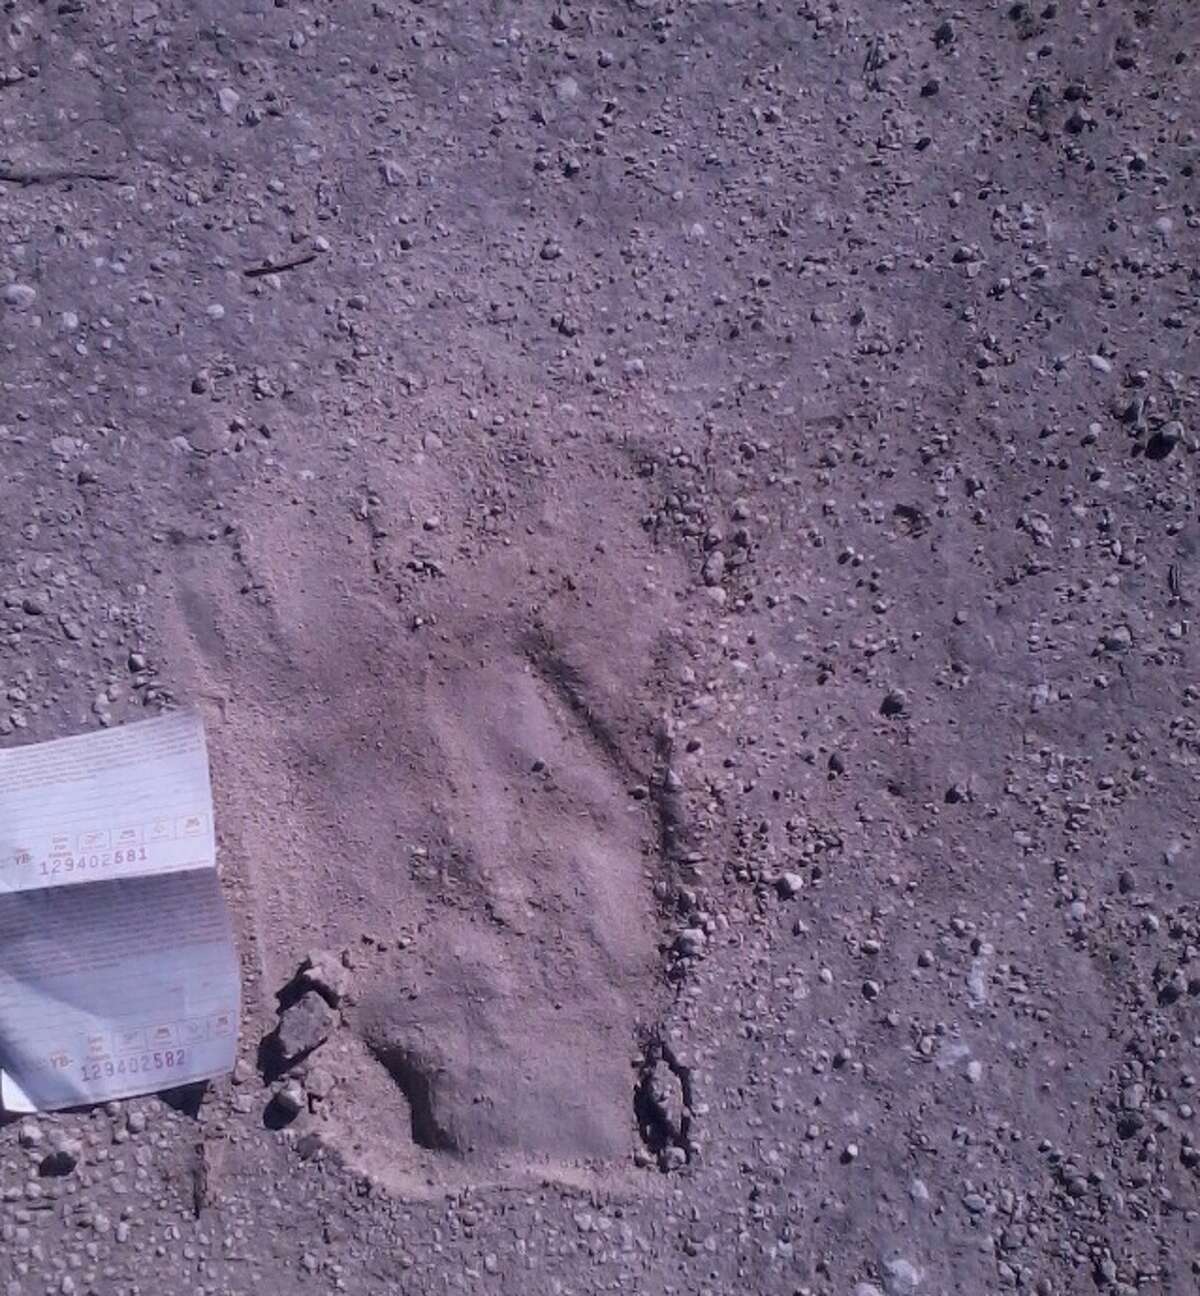 Tracks Last year, a pair of Bigfoot hunters in Bee County said the spotted a creepy creature in the Beeville area. One of the men even snapped a picture of a possible Bigfoot track, shown above.